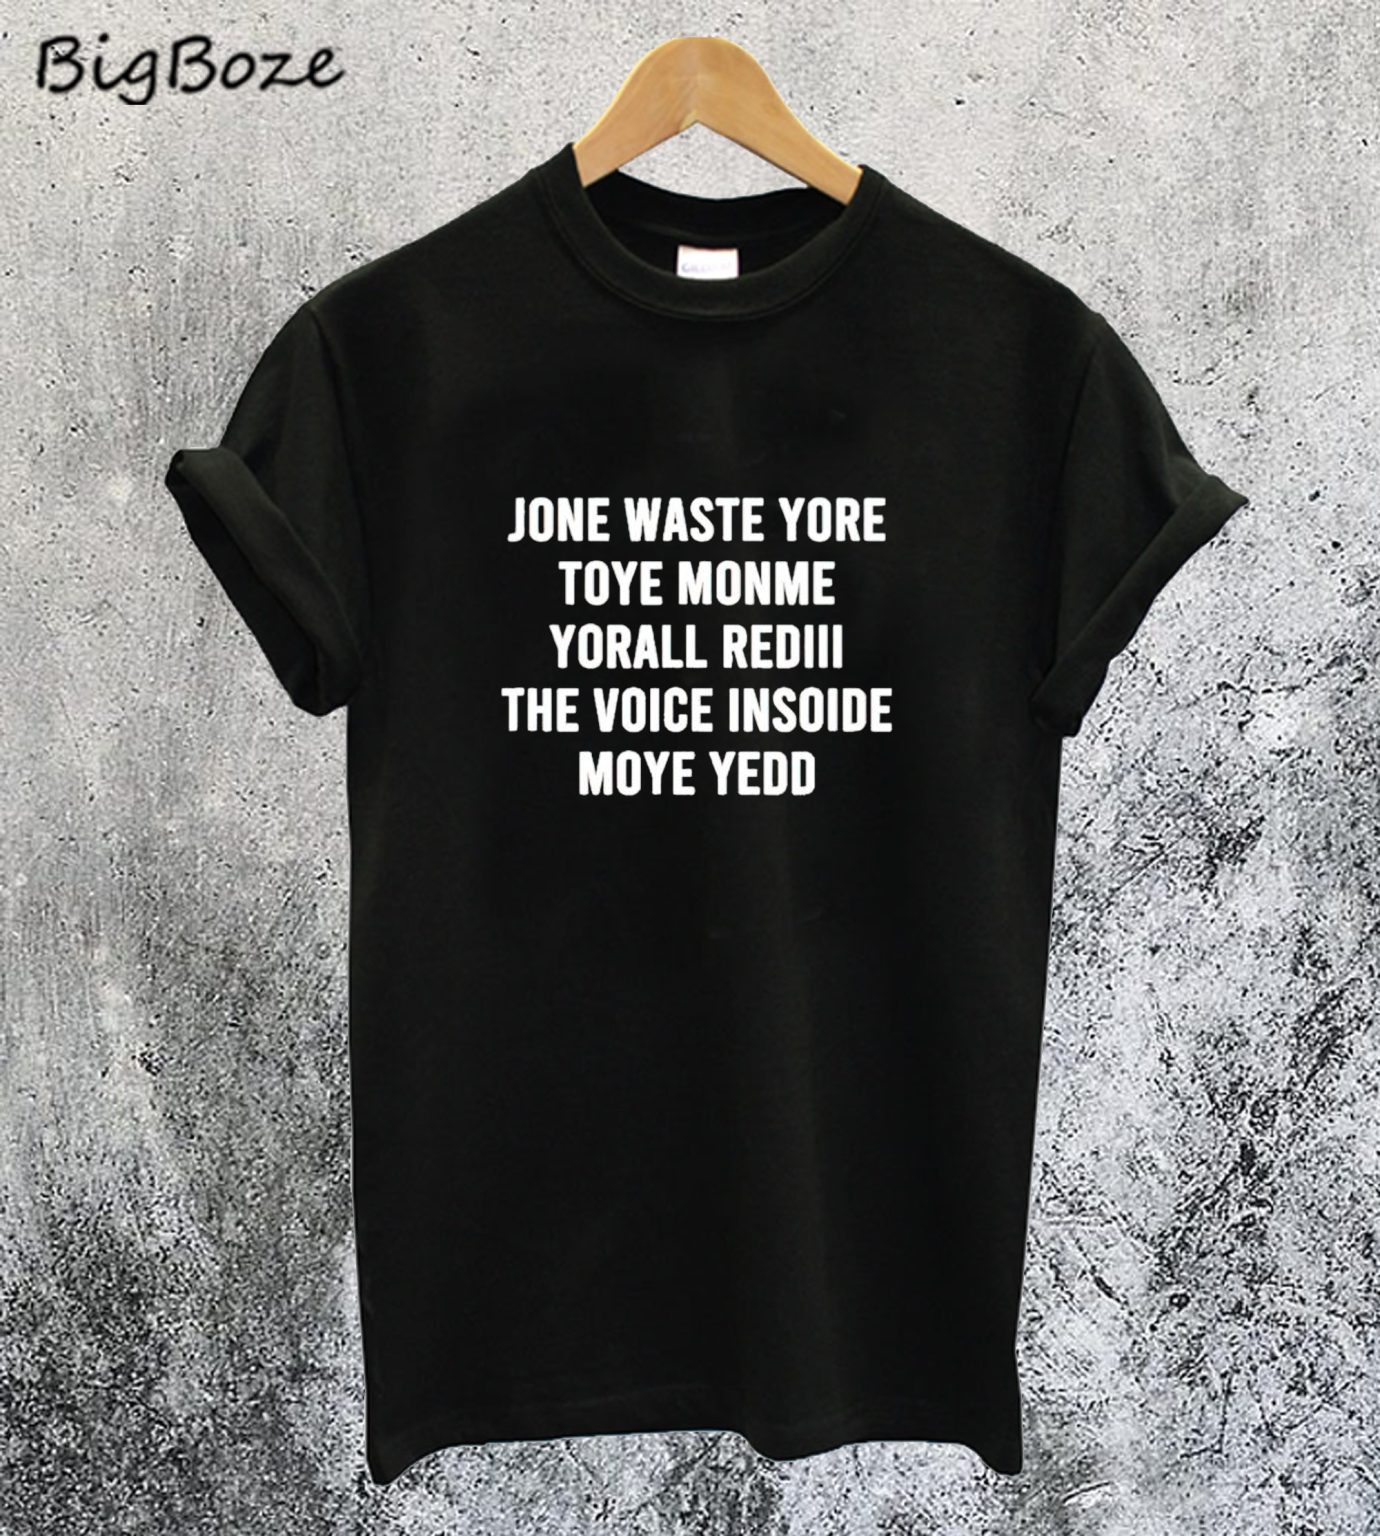 Jone Waste Your Time Blink 182 I Miss You T-Shirt